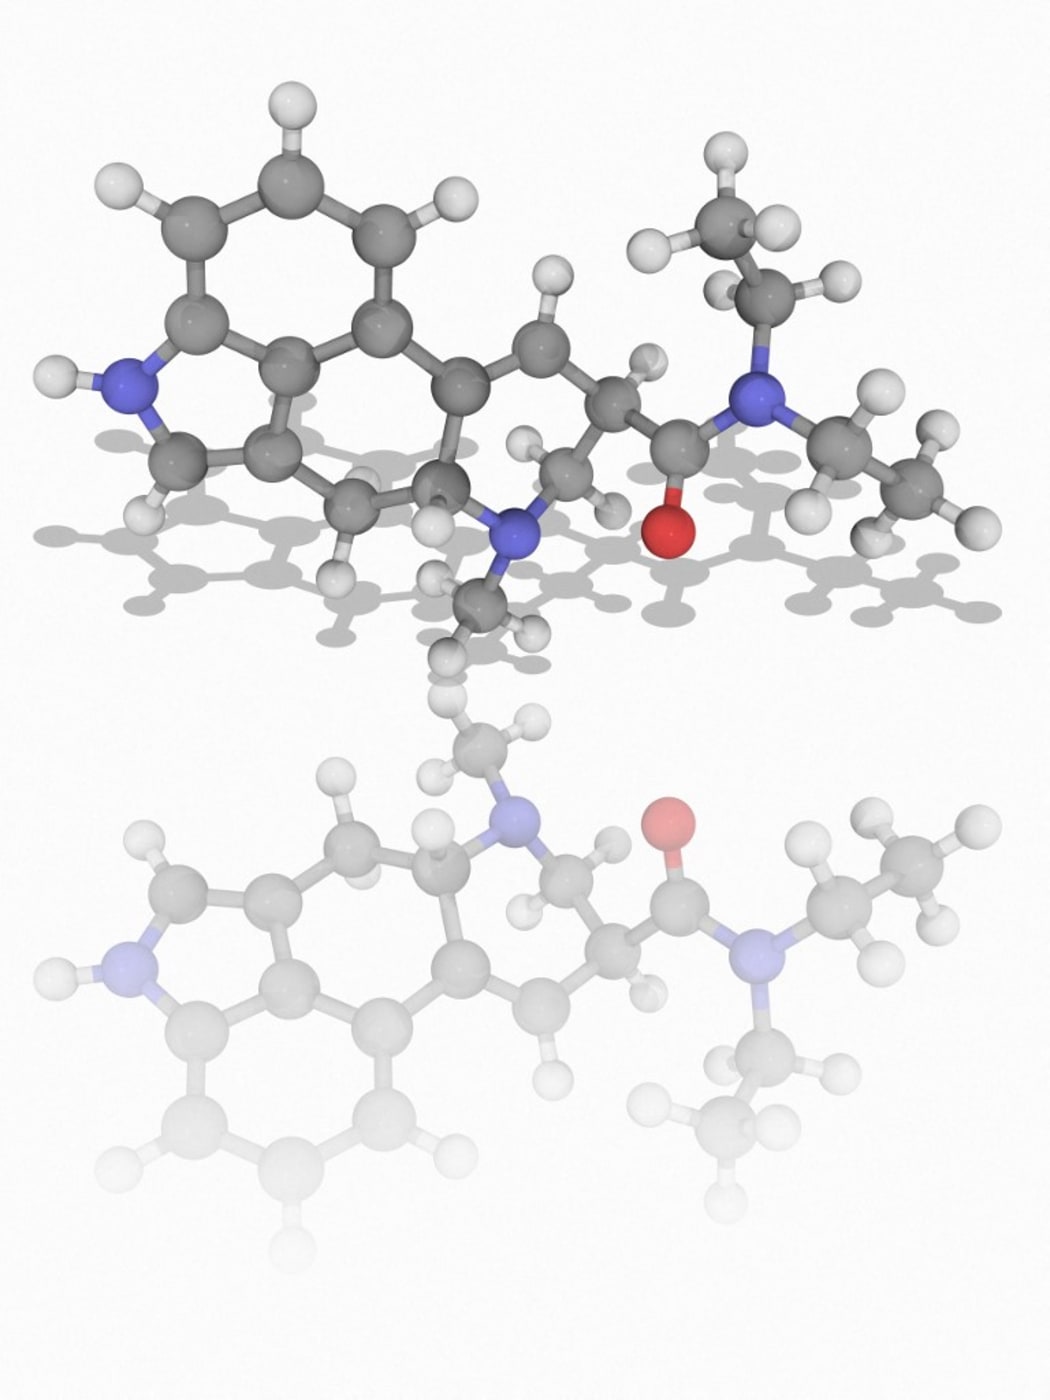 LSD drug. Molecular model of lysergic acid diethylamide (C20.H25.N3.O), also known as lysergide and more commonly called LSD.  Atoms are represented as spheres and are colour-coded: carbon (grey), hydrogen (white), nitrogen (blue) and oxygen (red).